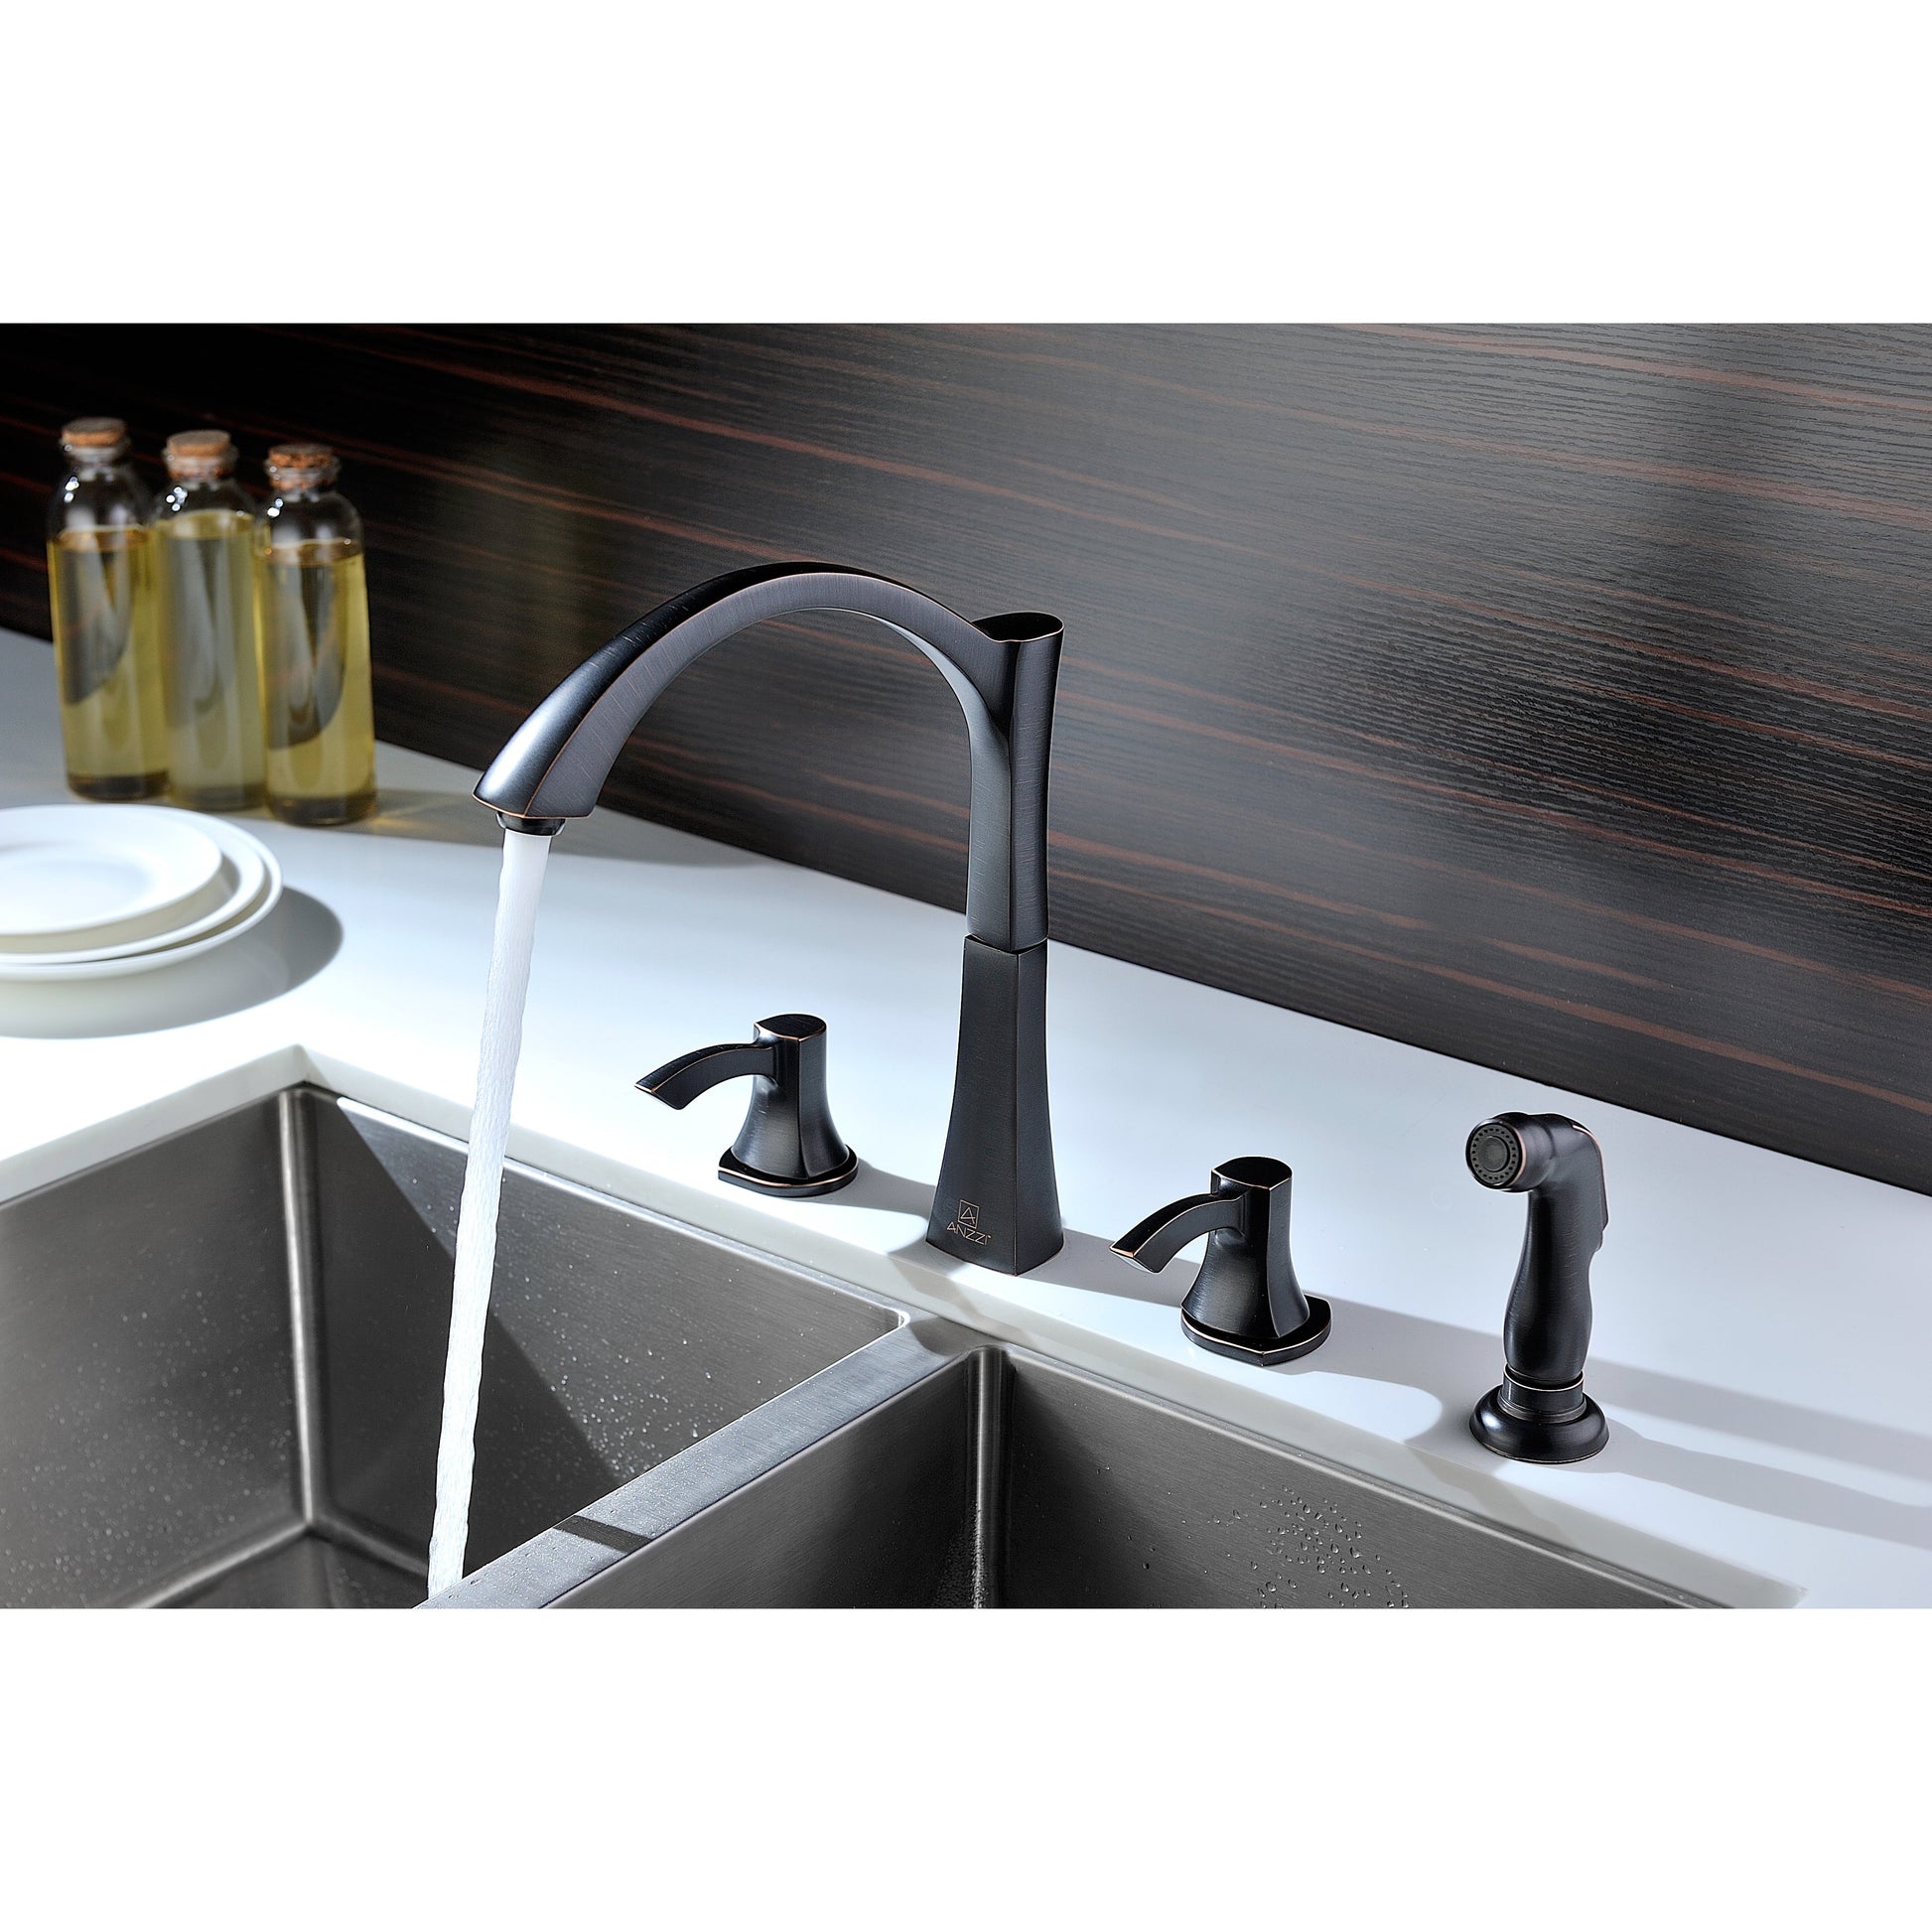 ANZZI Soave Series Double Hole Oil Rubbed Bronze Kitchen Faucet With Euro-Grip Pull Out Sprayer and 360-Degree Turning Spout